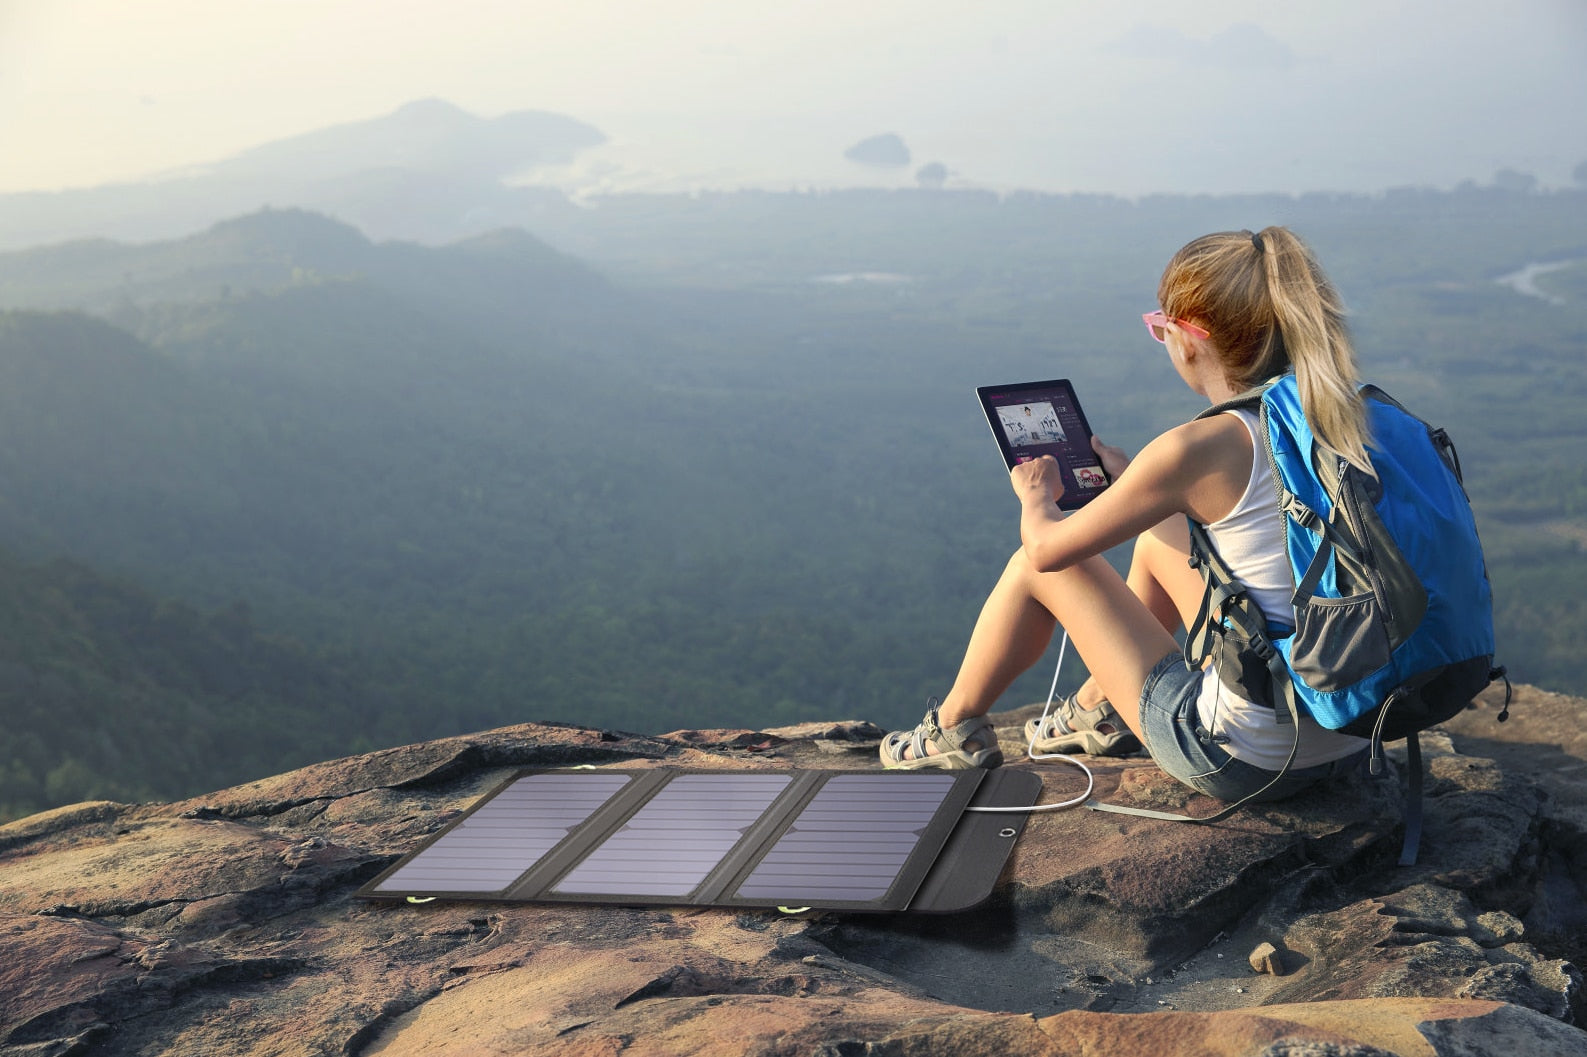 2USB Ports 21W Solar Charger, Portable Solar Panel，Outdoor Emergency Backup Power for Camping Iphone Gopro Ipad Huawei